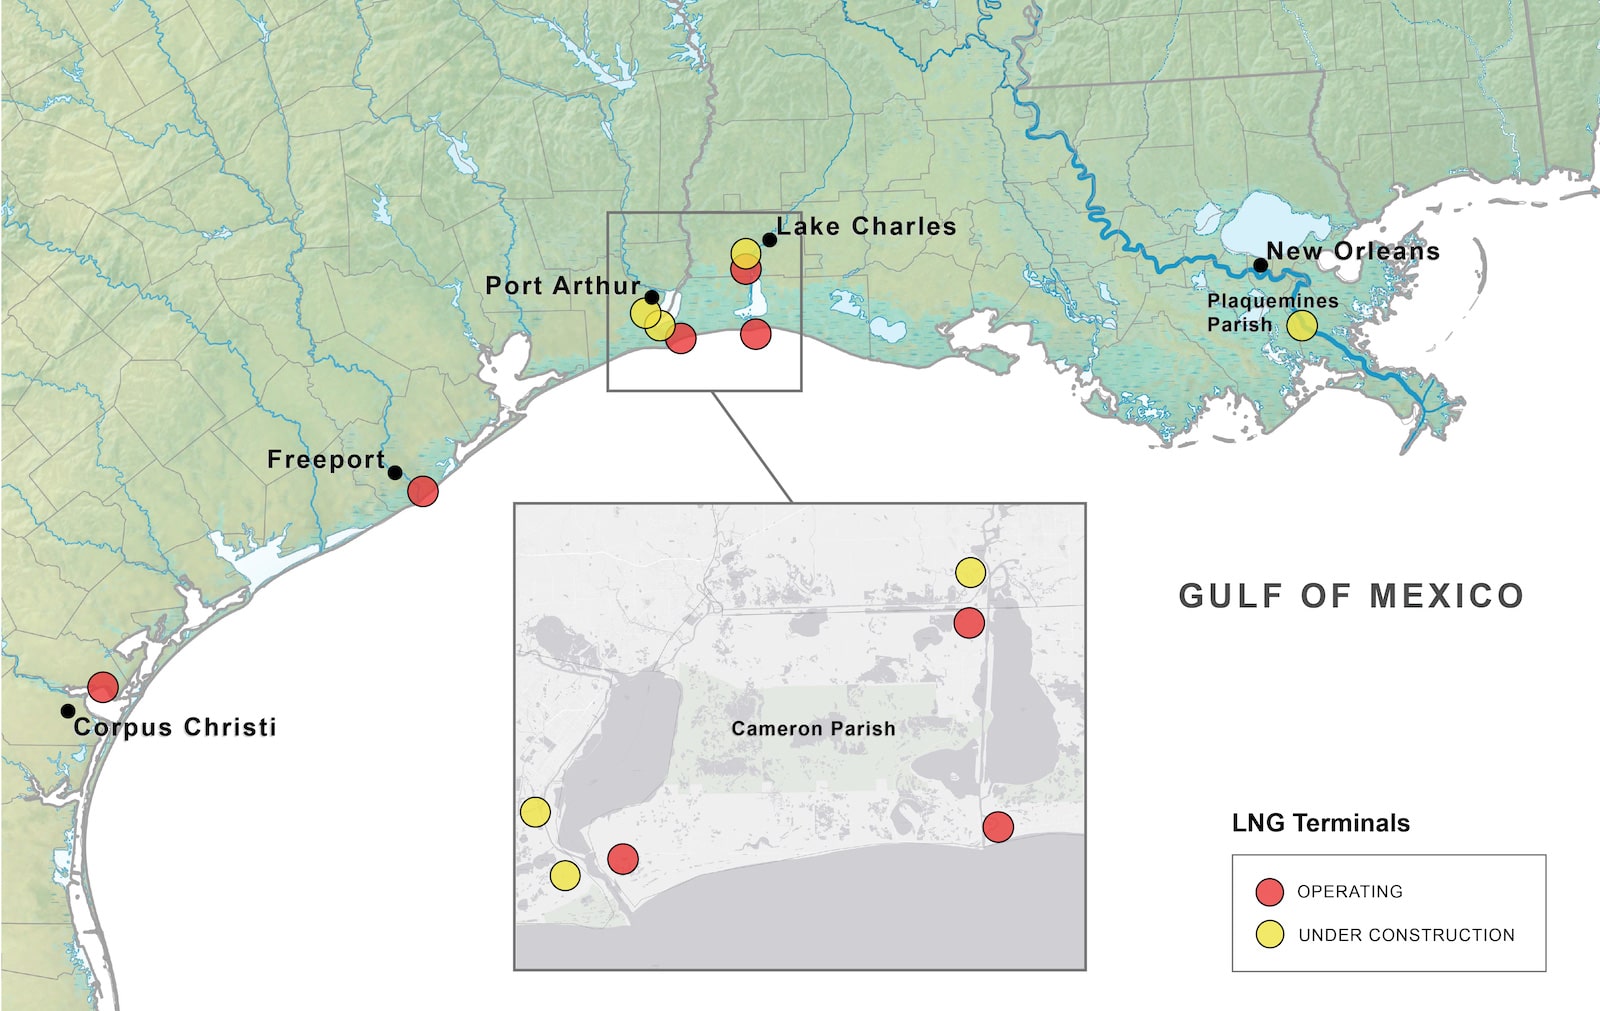 a map of the gulf coast showing LNG terminals